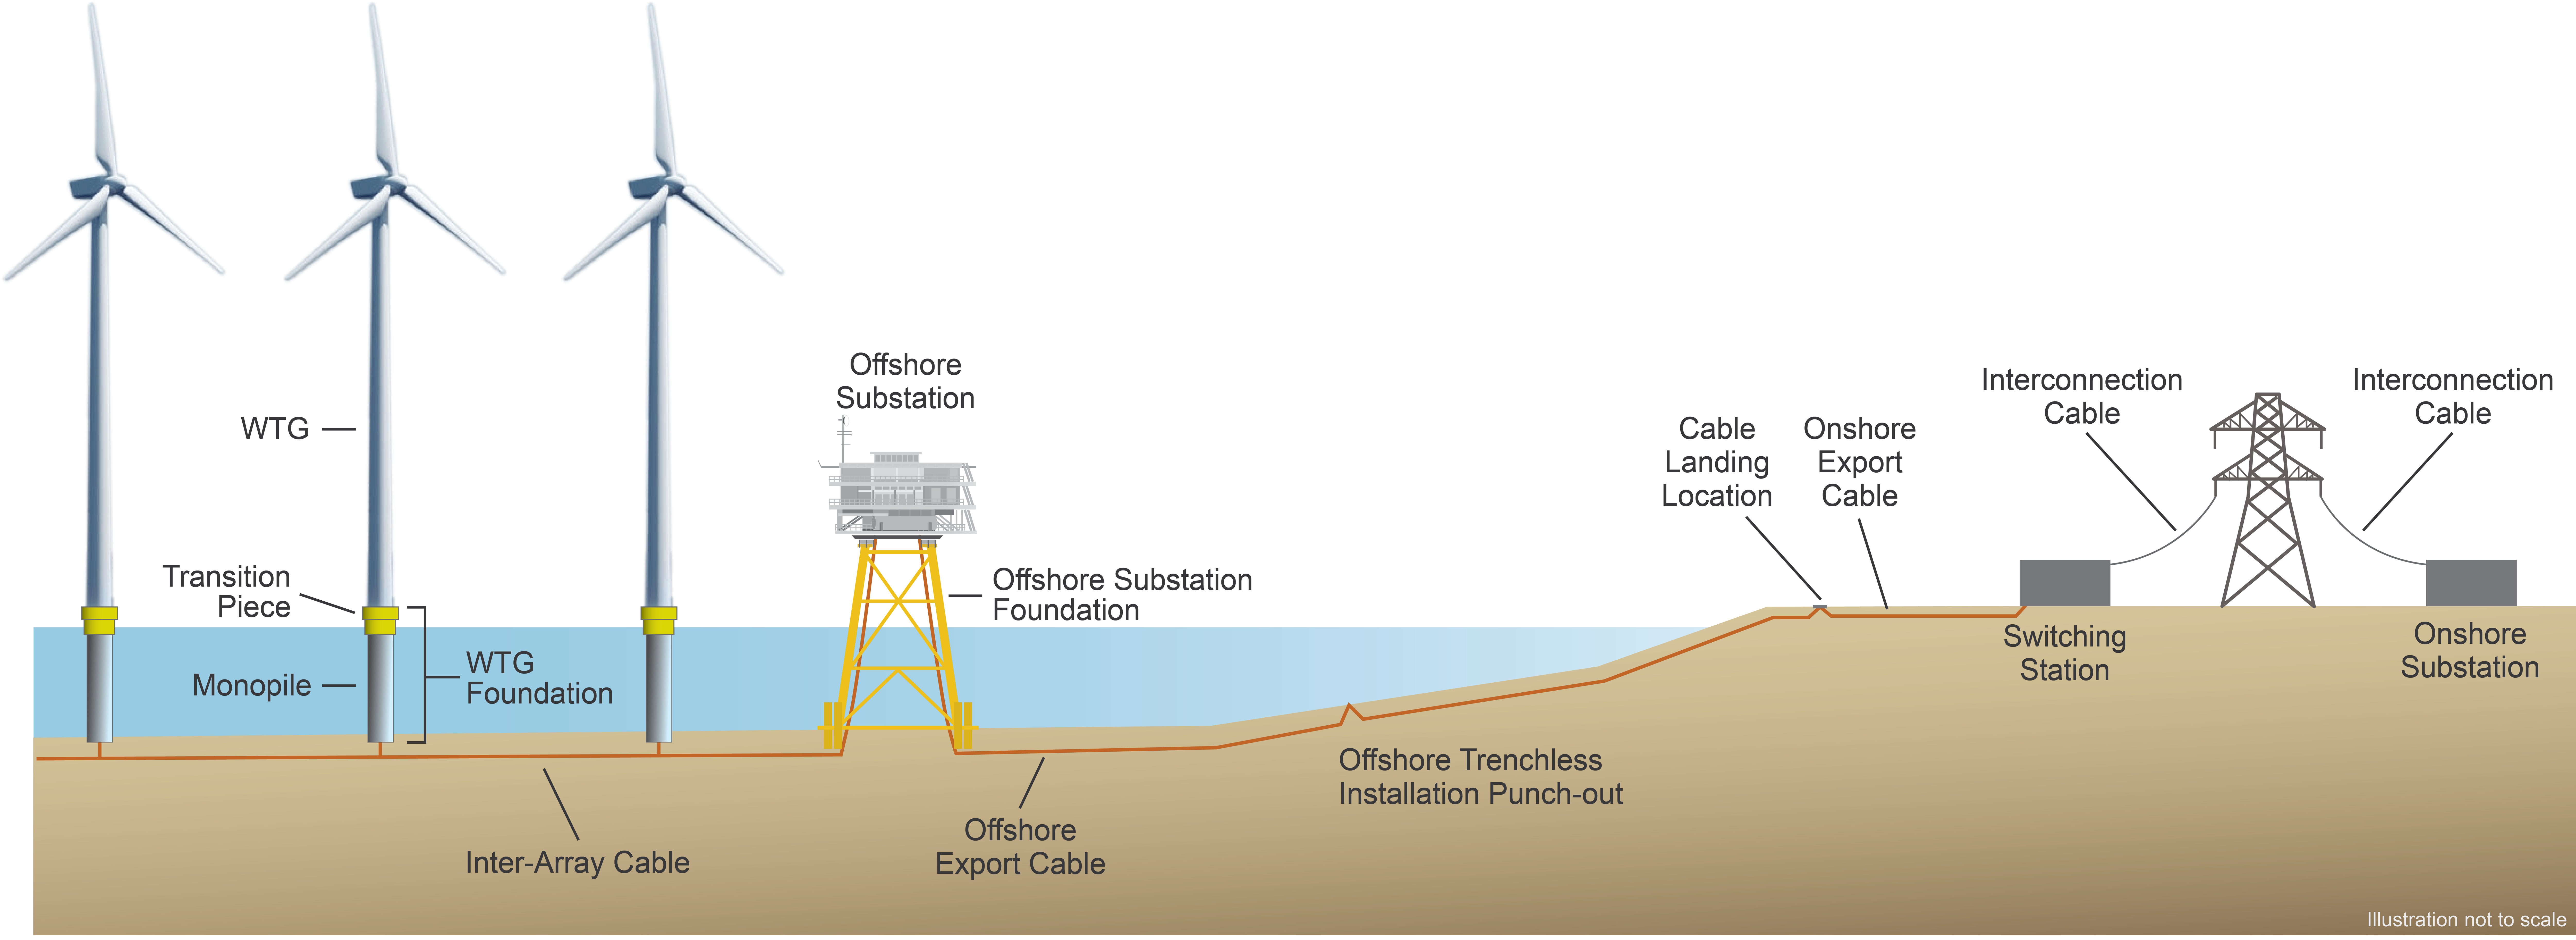 Coastal Virginia Offshore Wind project infographic showing first two turbines and shoreline